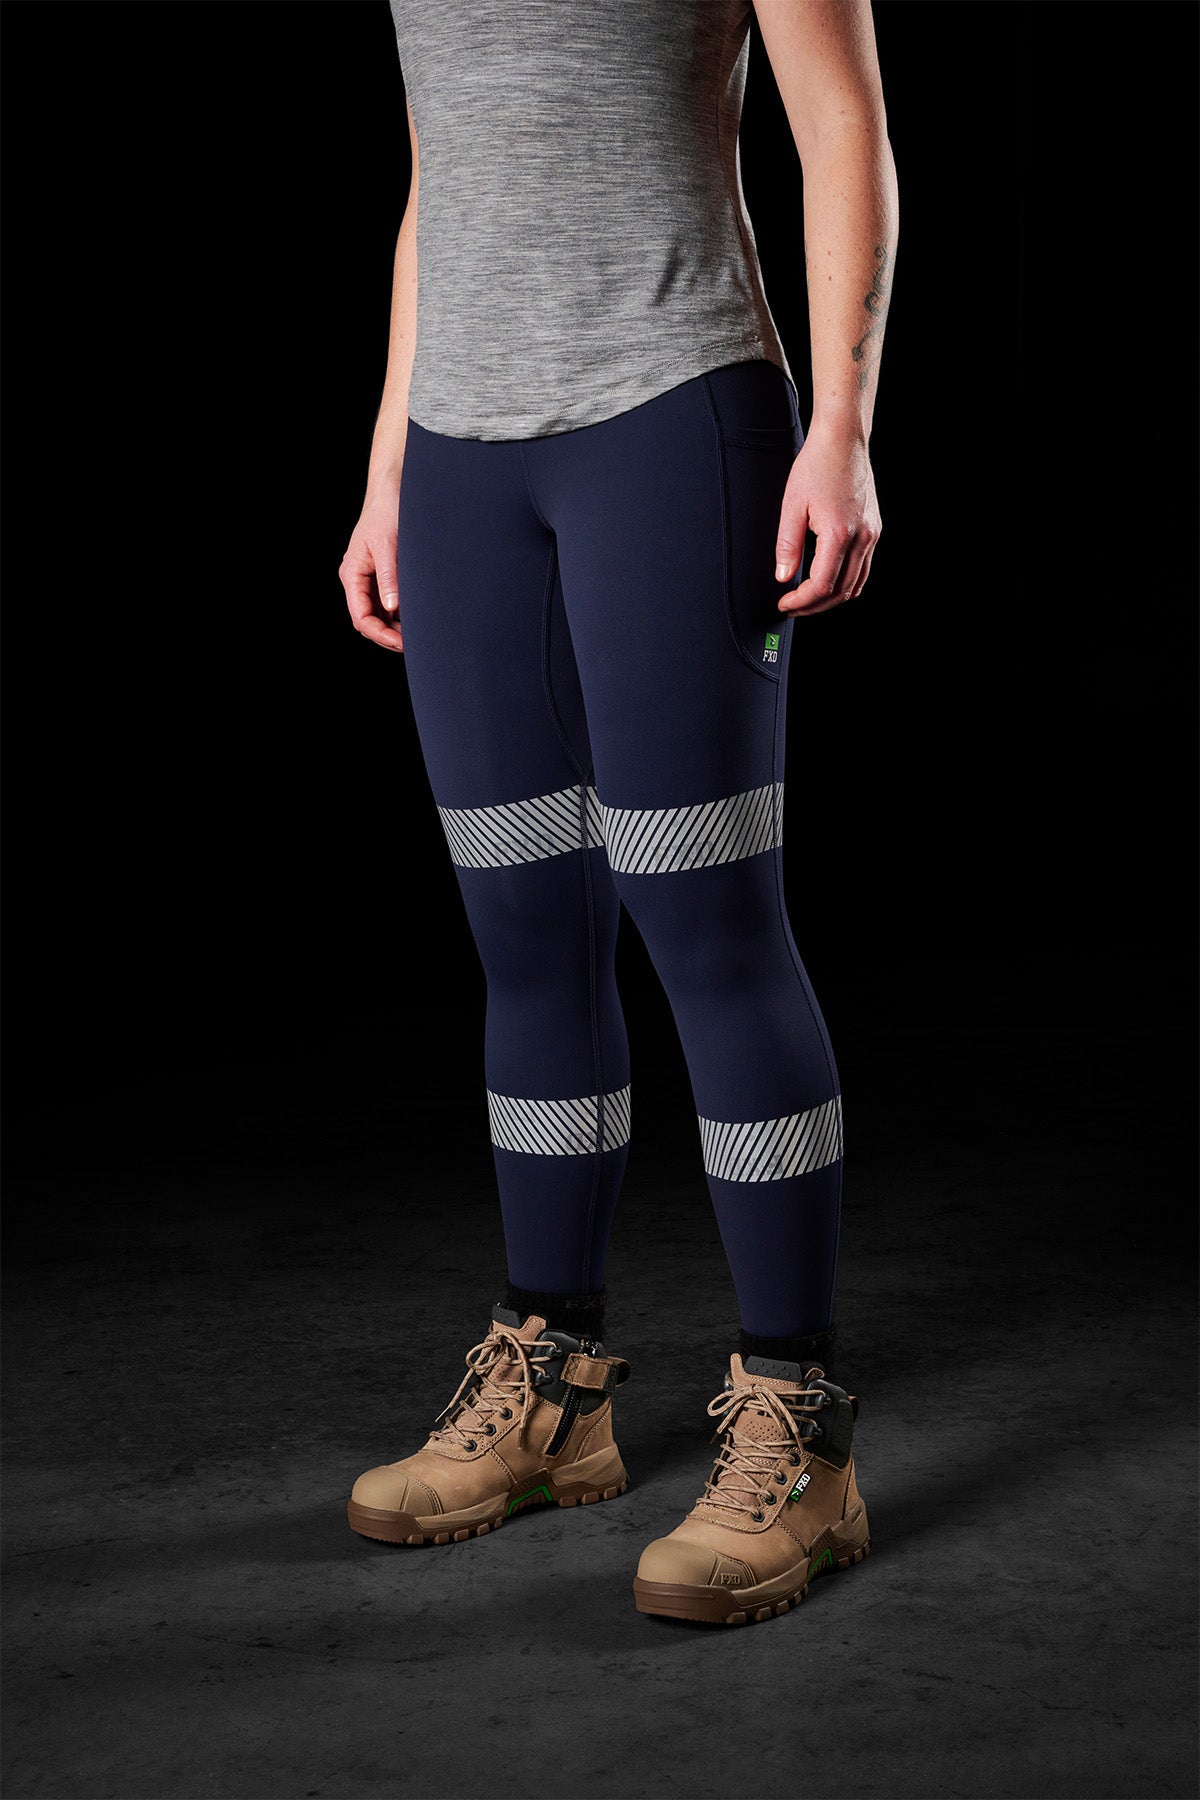 FXD - WP-9WT - Womens Taped Tights - Navy